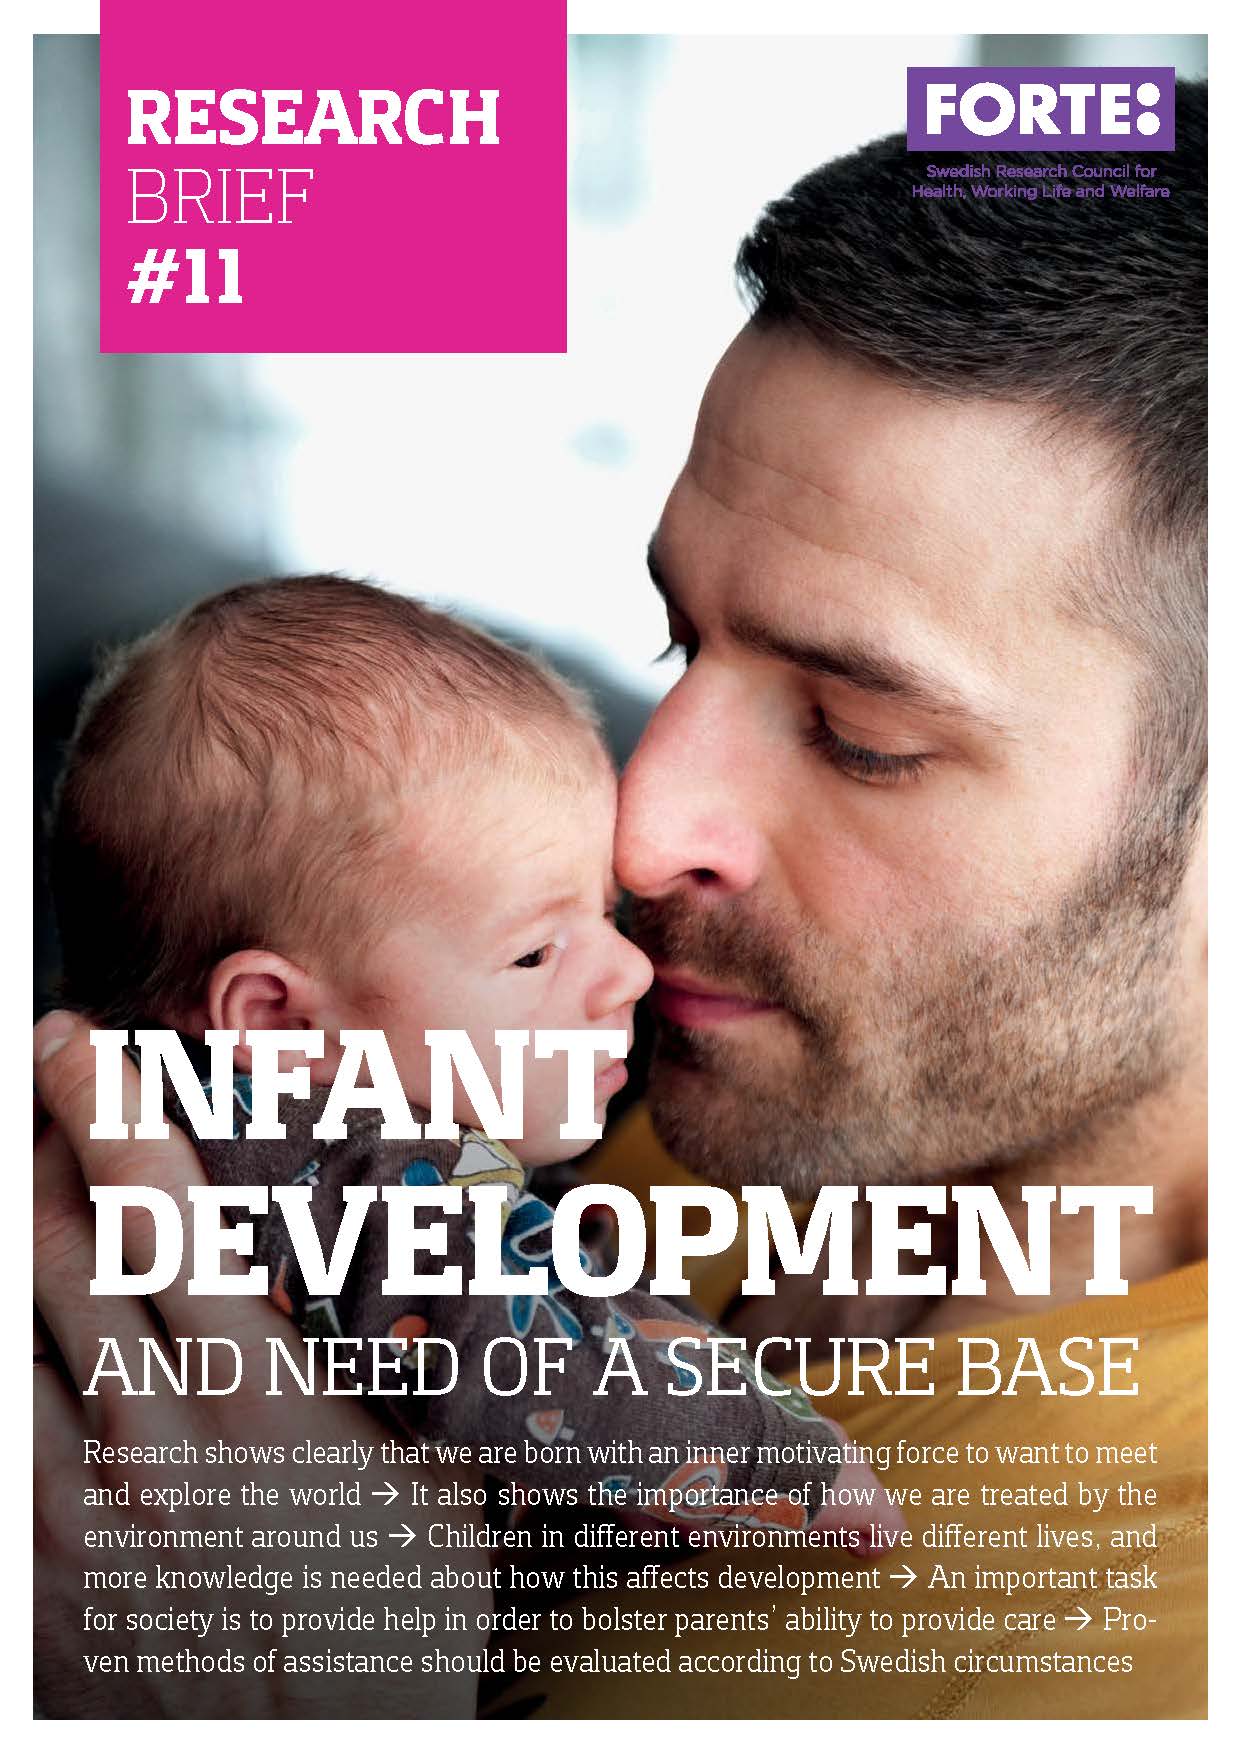 Research brief: Infant development and need of a secure base